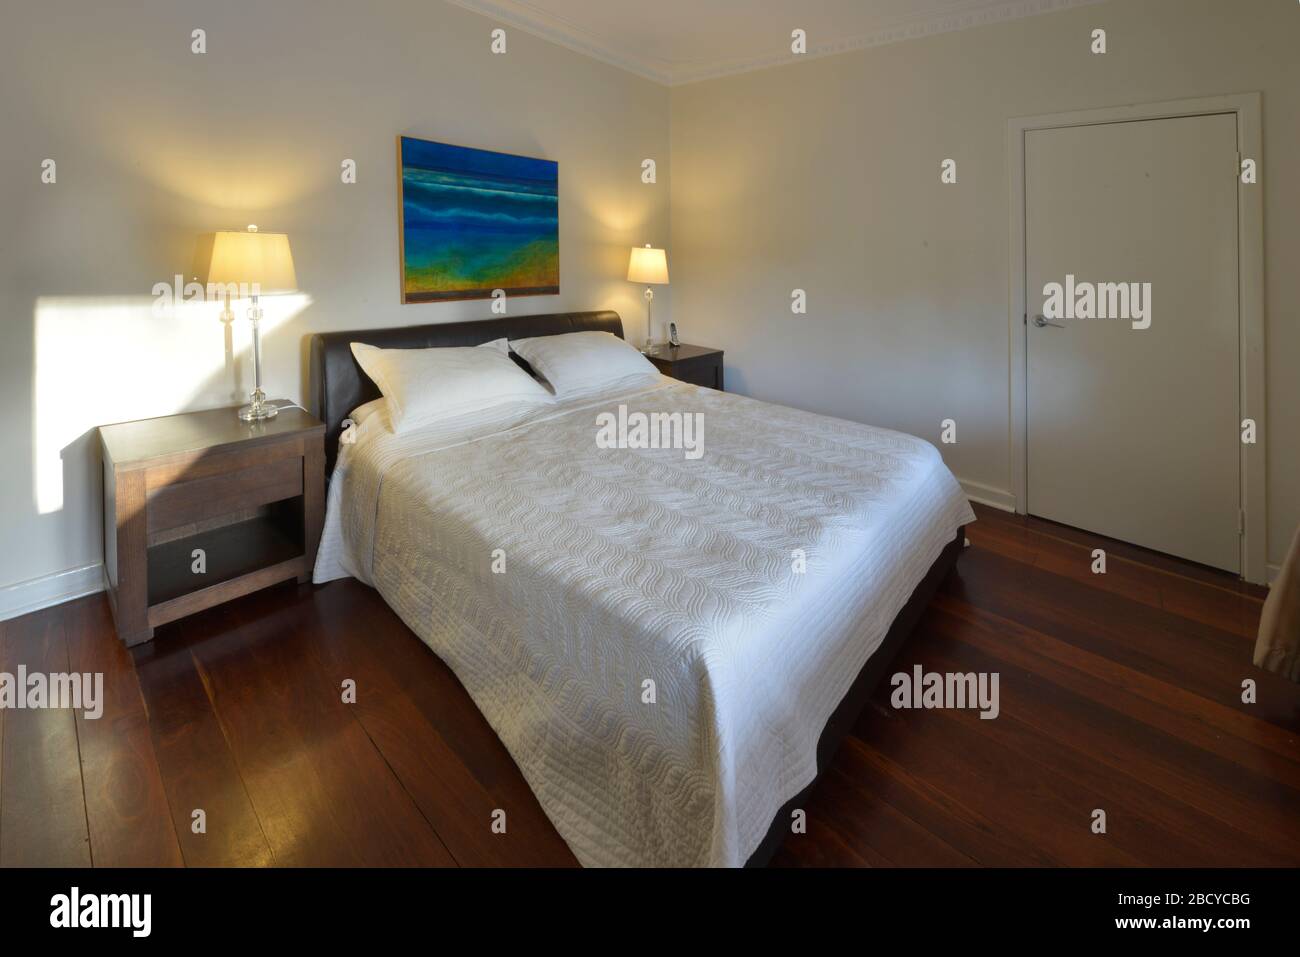 The bedroom of a modern Australian bungalow style family home. Stock Photo